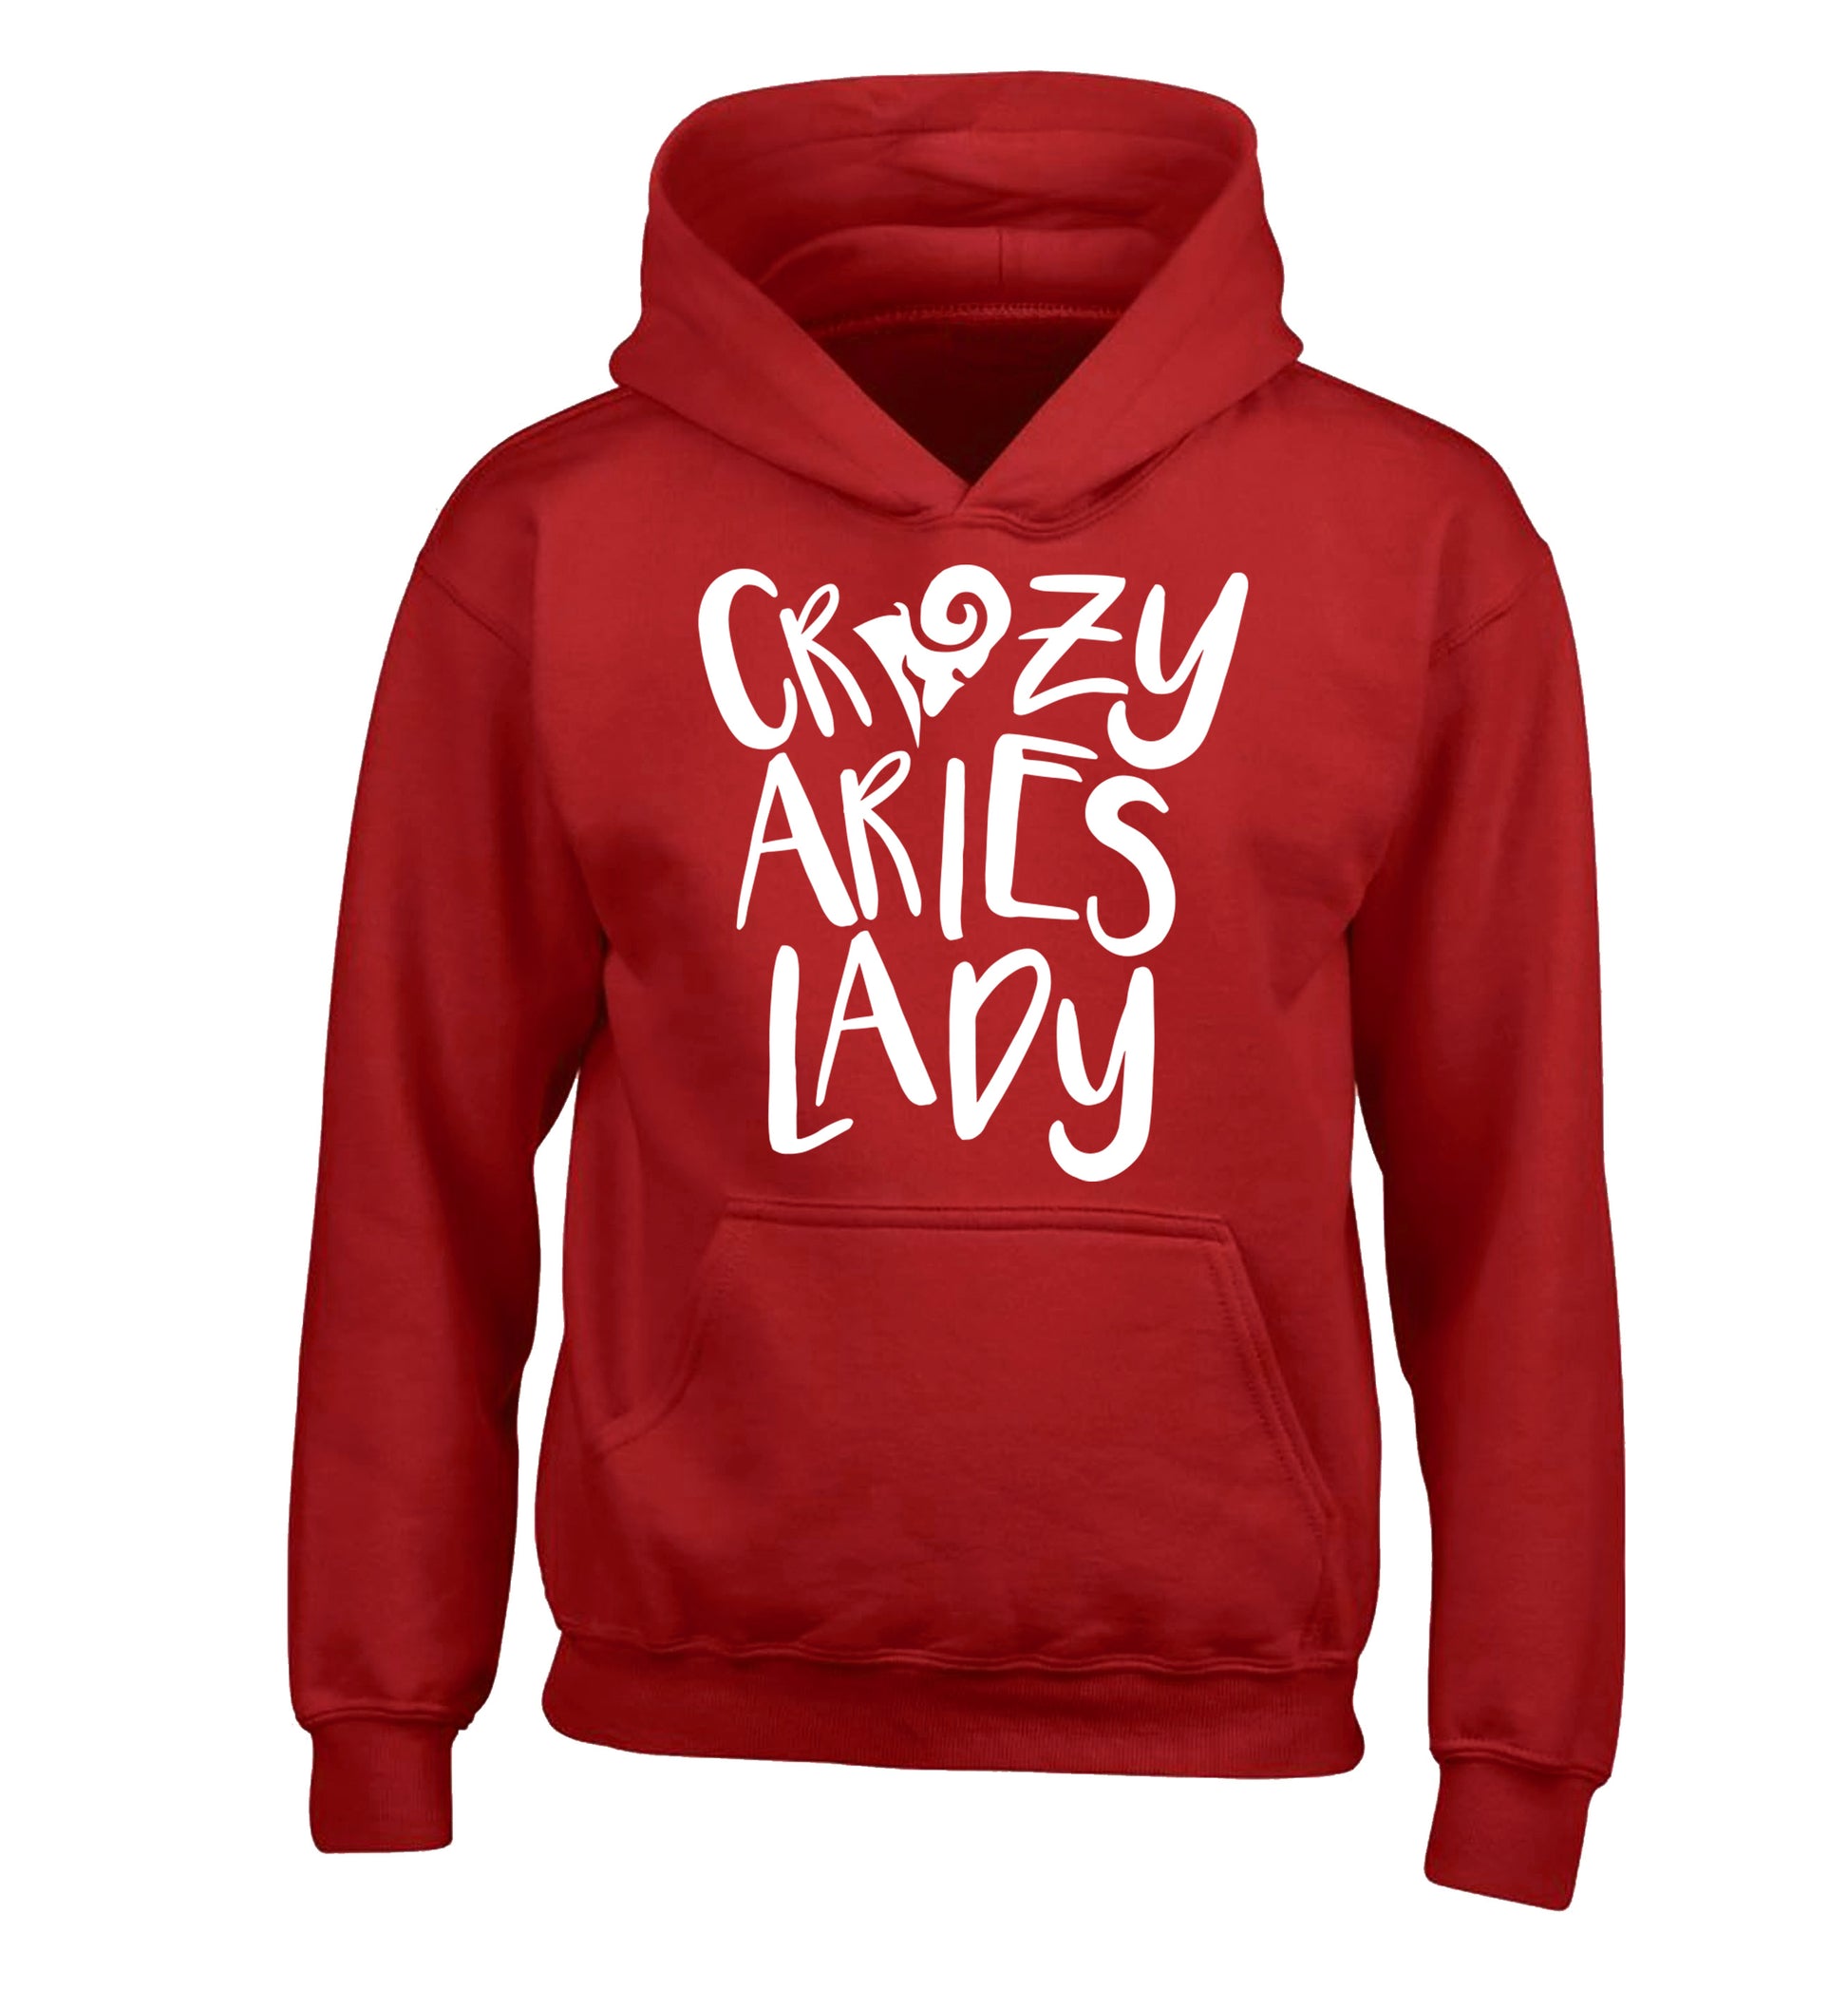 Crazy aries lady children's red hoodie 12-13 Years